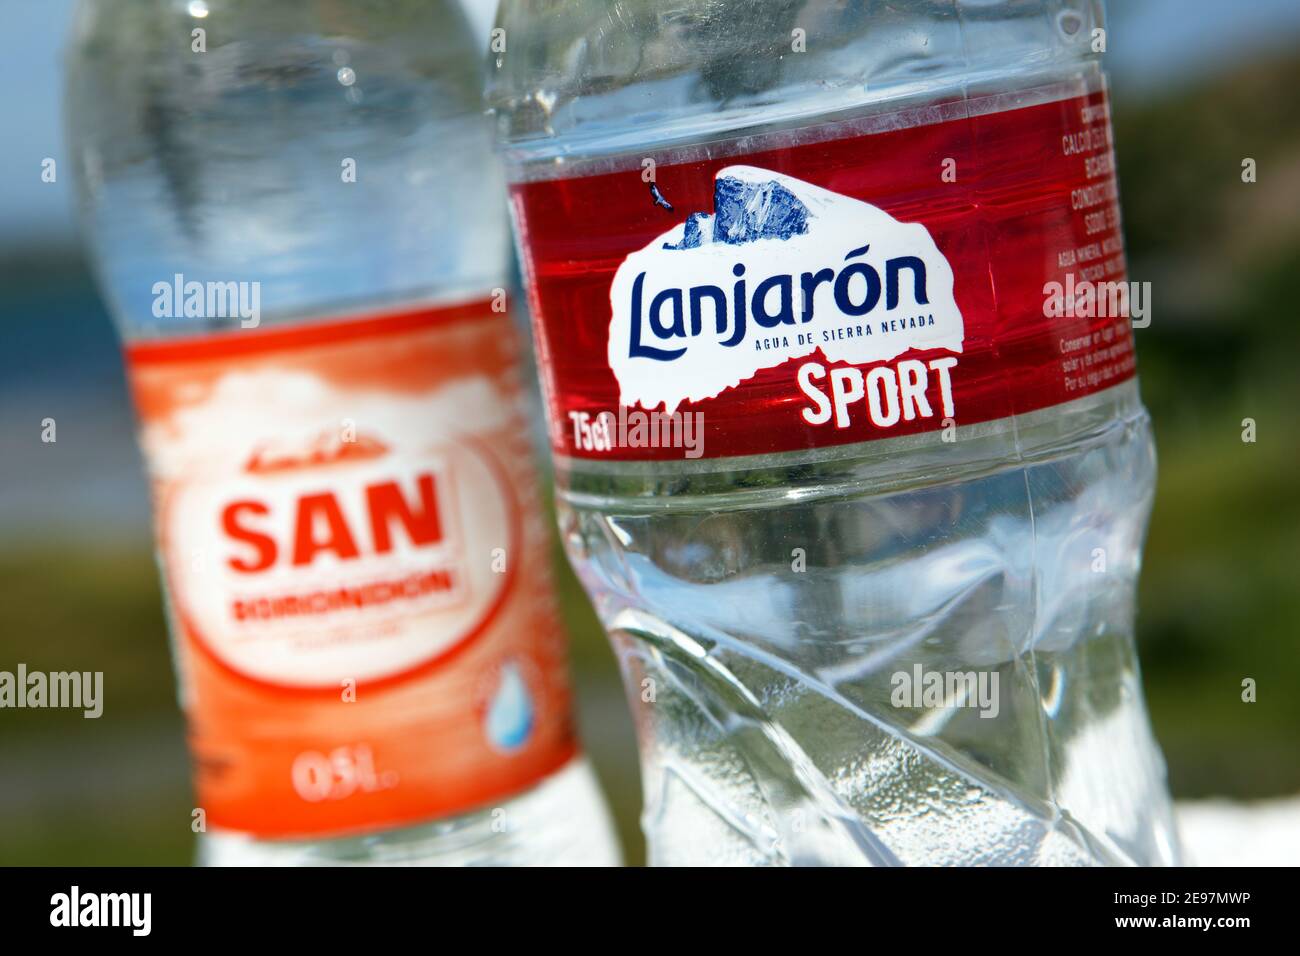 Bottles of Lanjaron and San Borondon mineral water from Spain Stock Photo